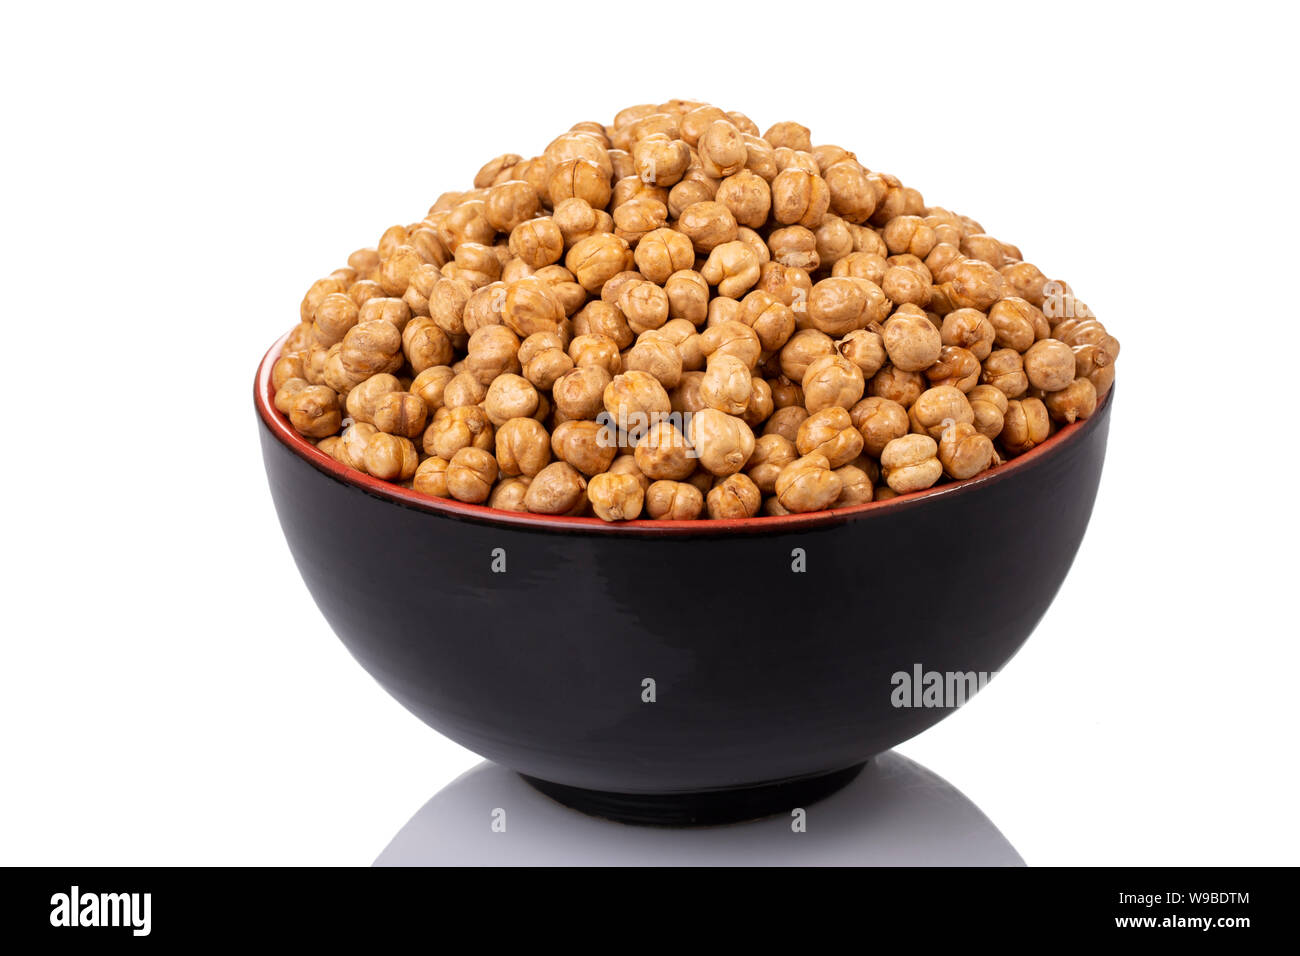 cheakpeas on a black bowl in a white background Stock Photo